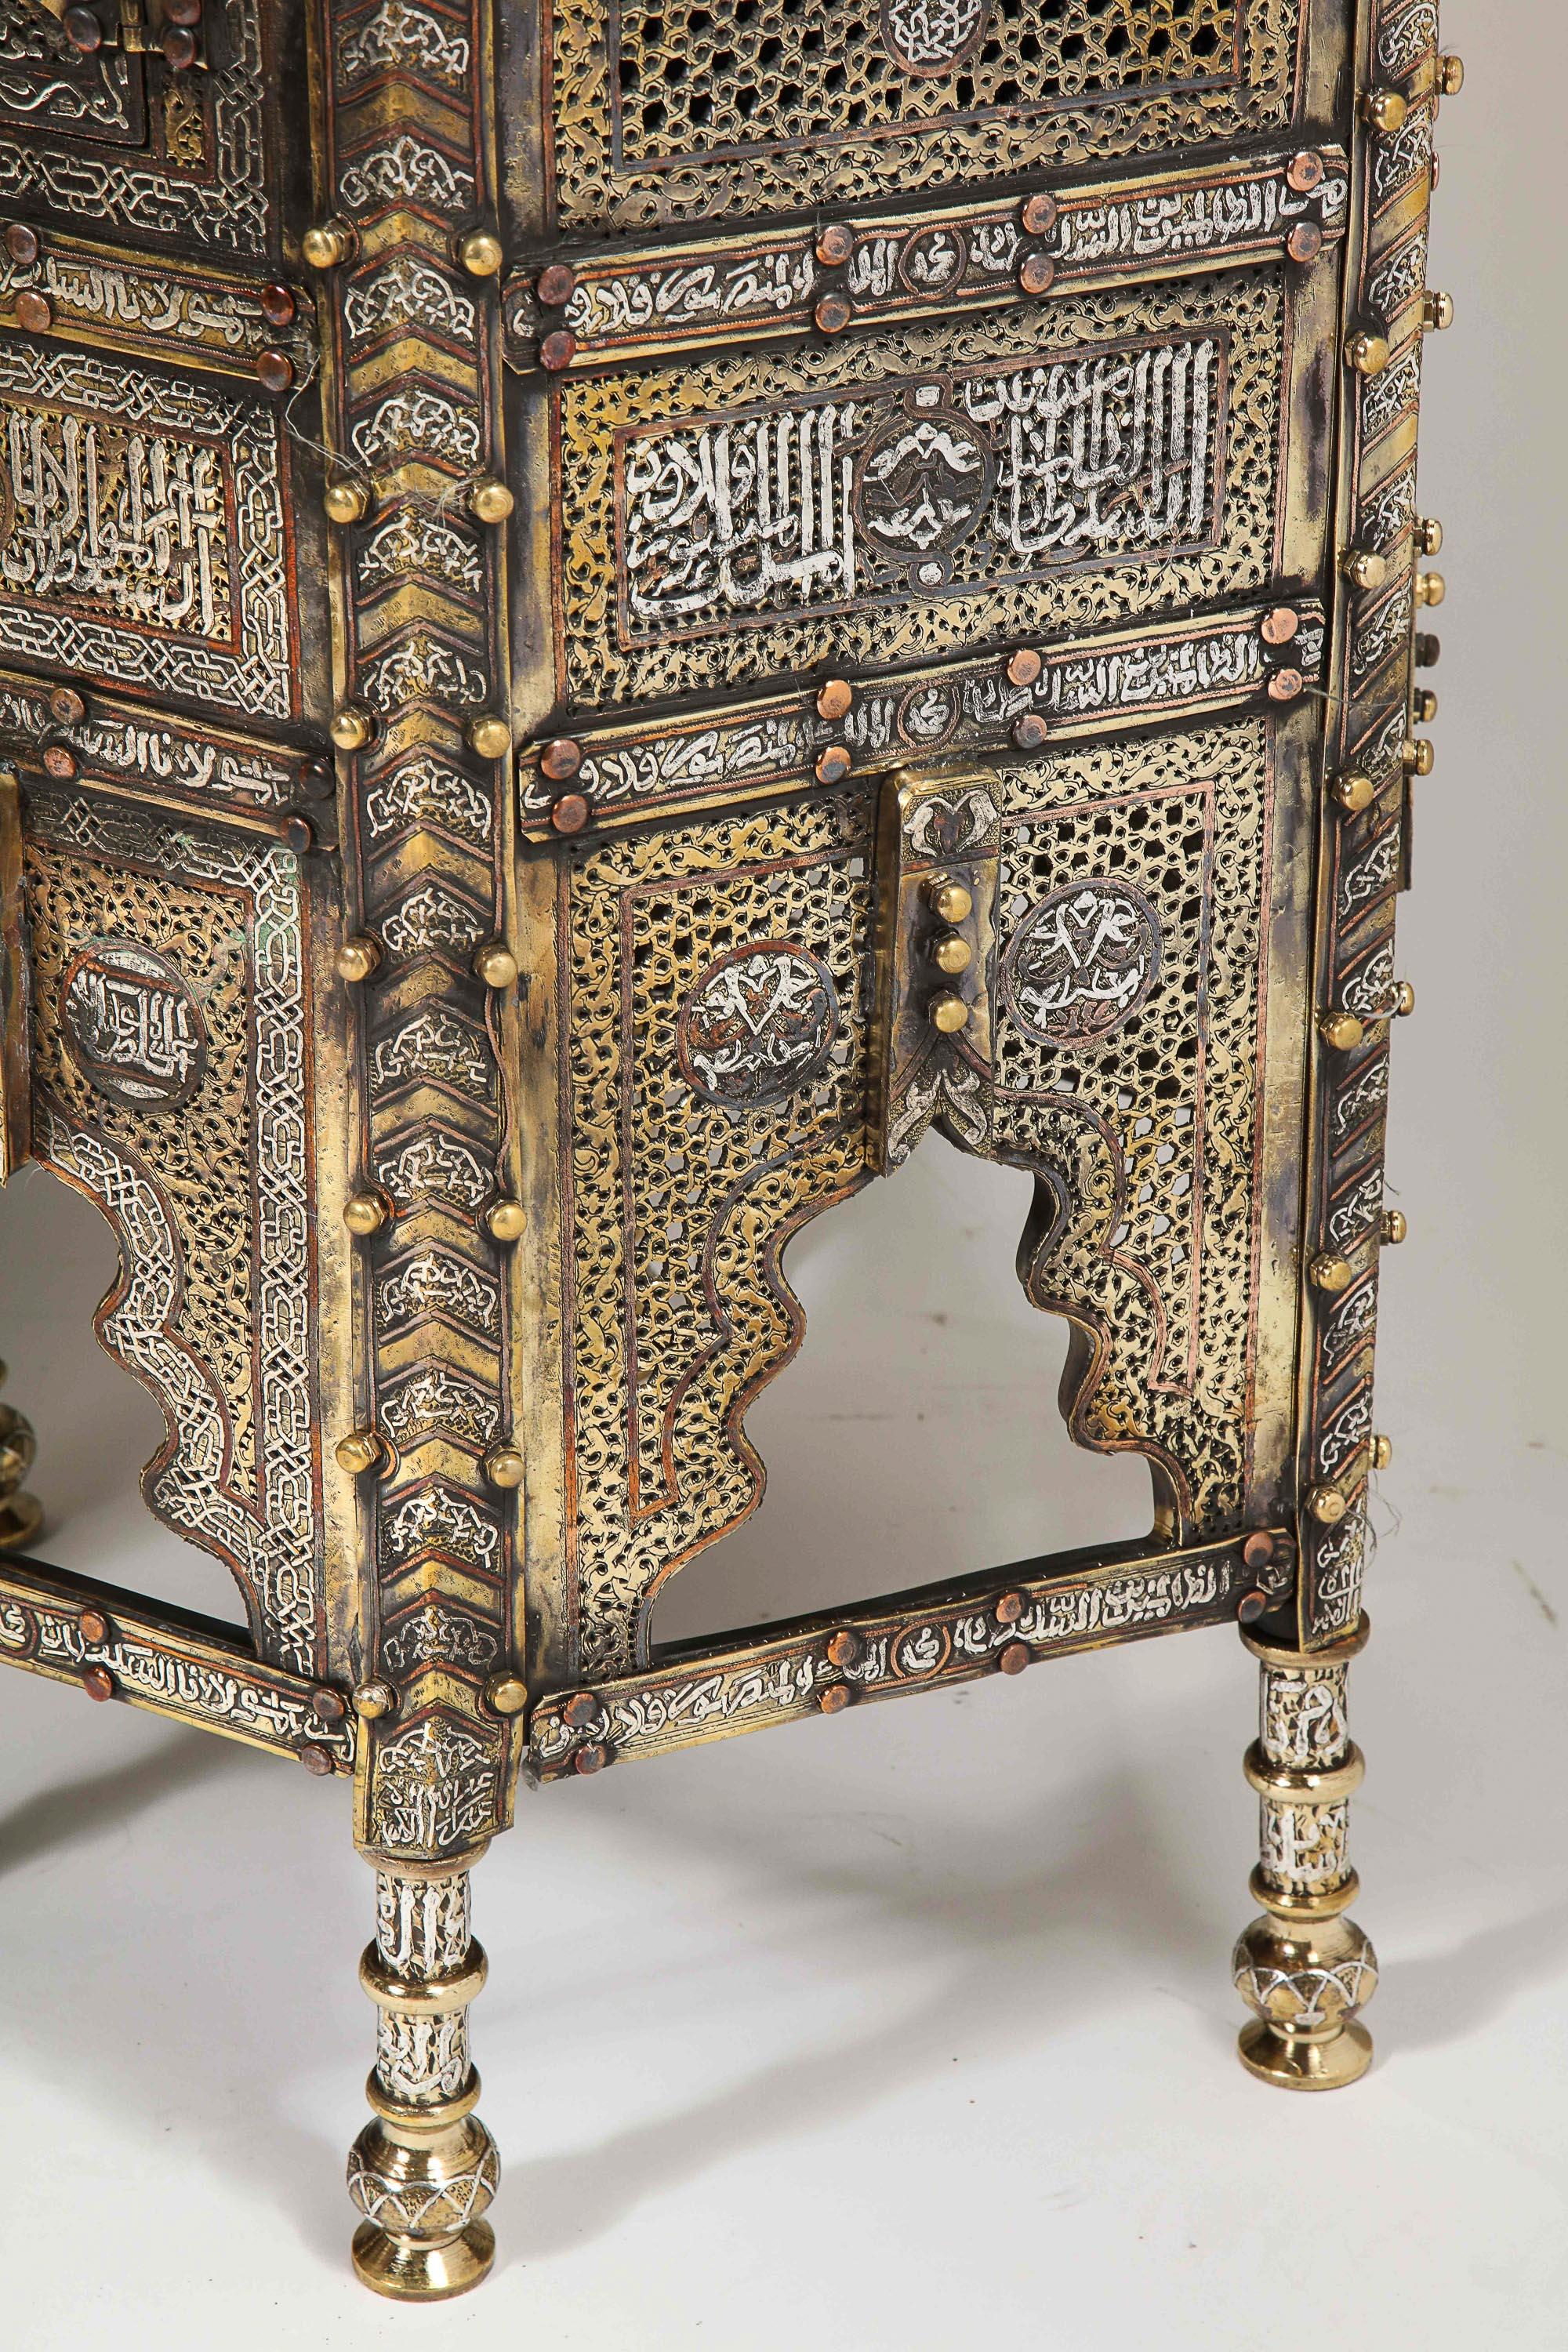 Exceptional Pair of Islamic Mamluk Revival Silver Inlaid Quran Side Tables For Sale 15